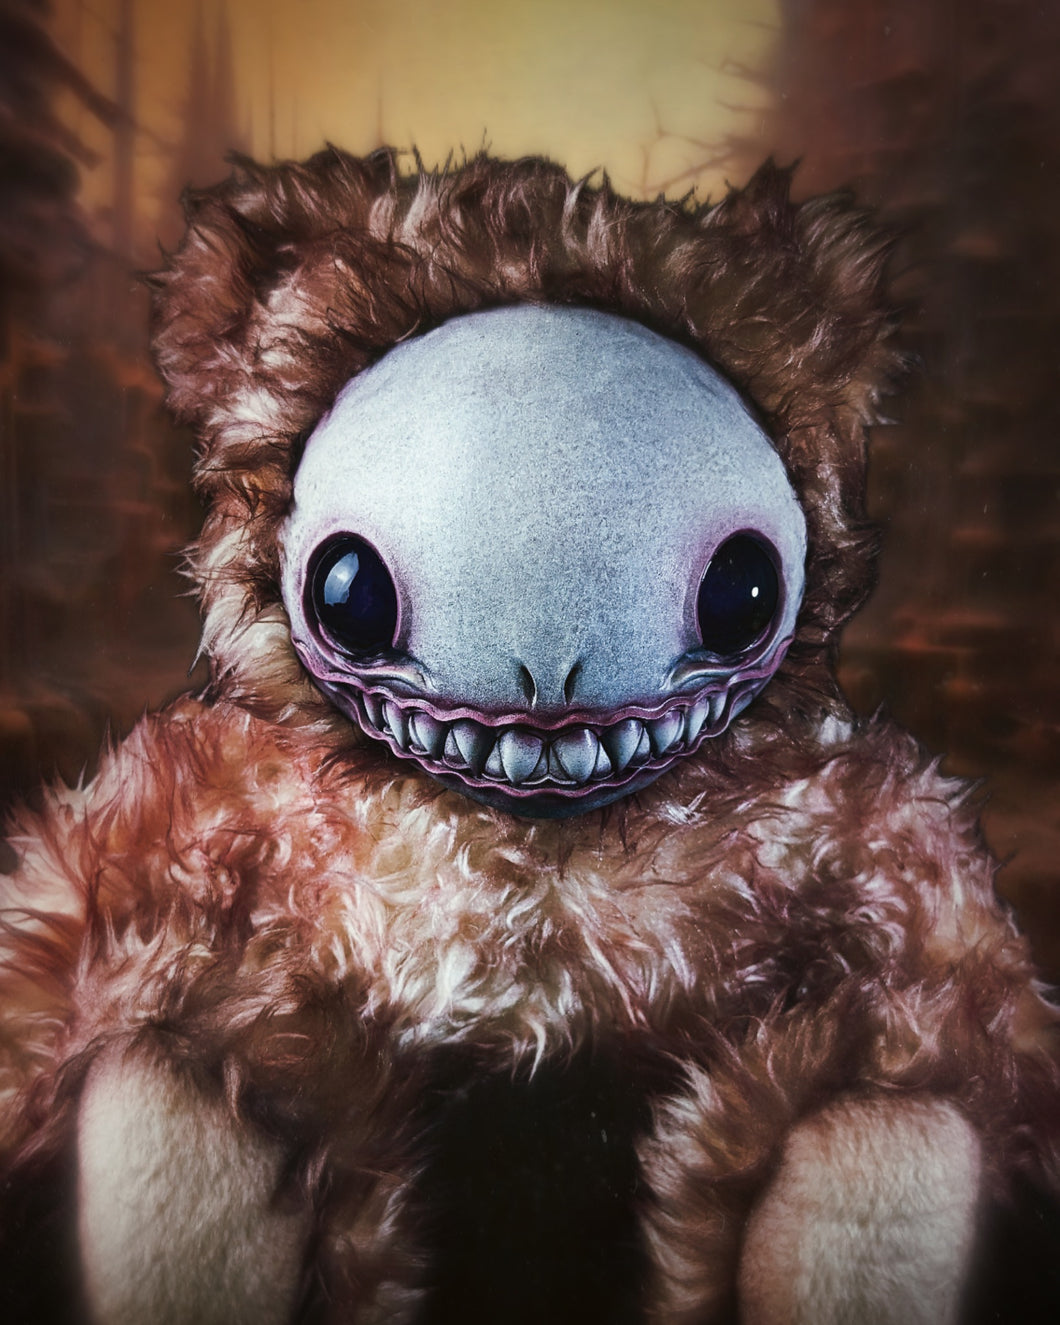 Freak Unleashed: FRIEND - CRYPTCRITZ Handcrafted Alien Art Doll Plush Toy for Cosmic Dreamers